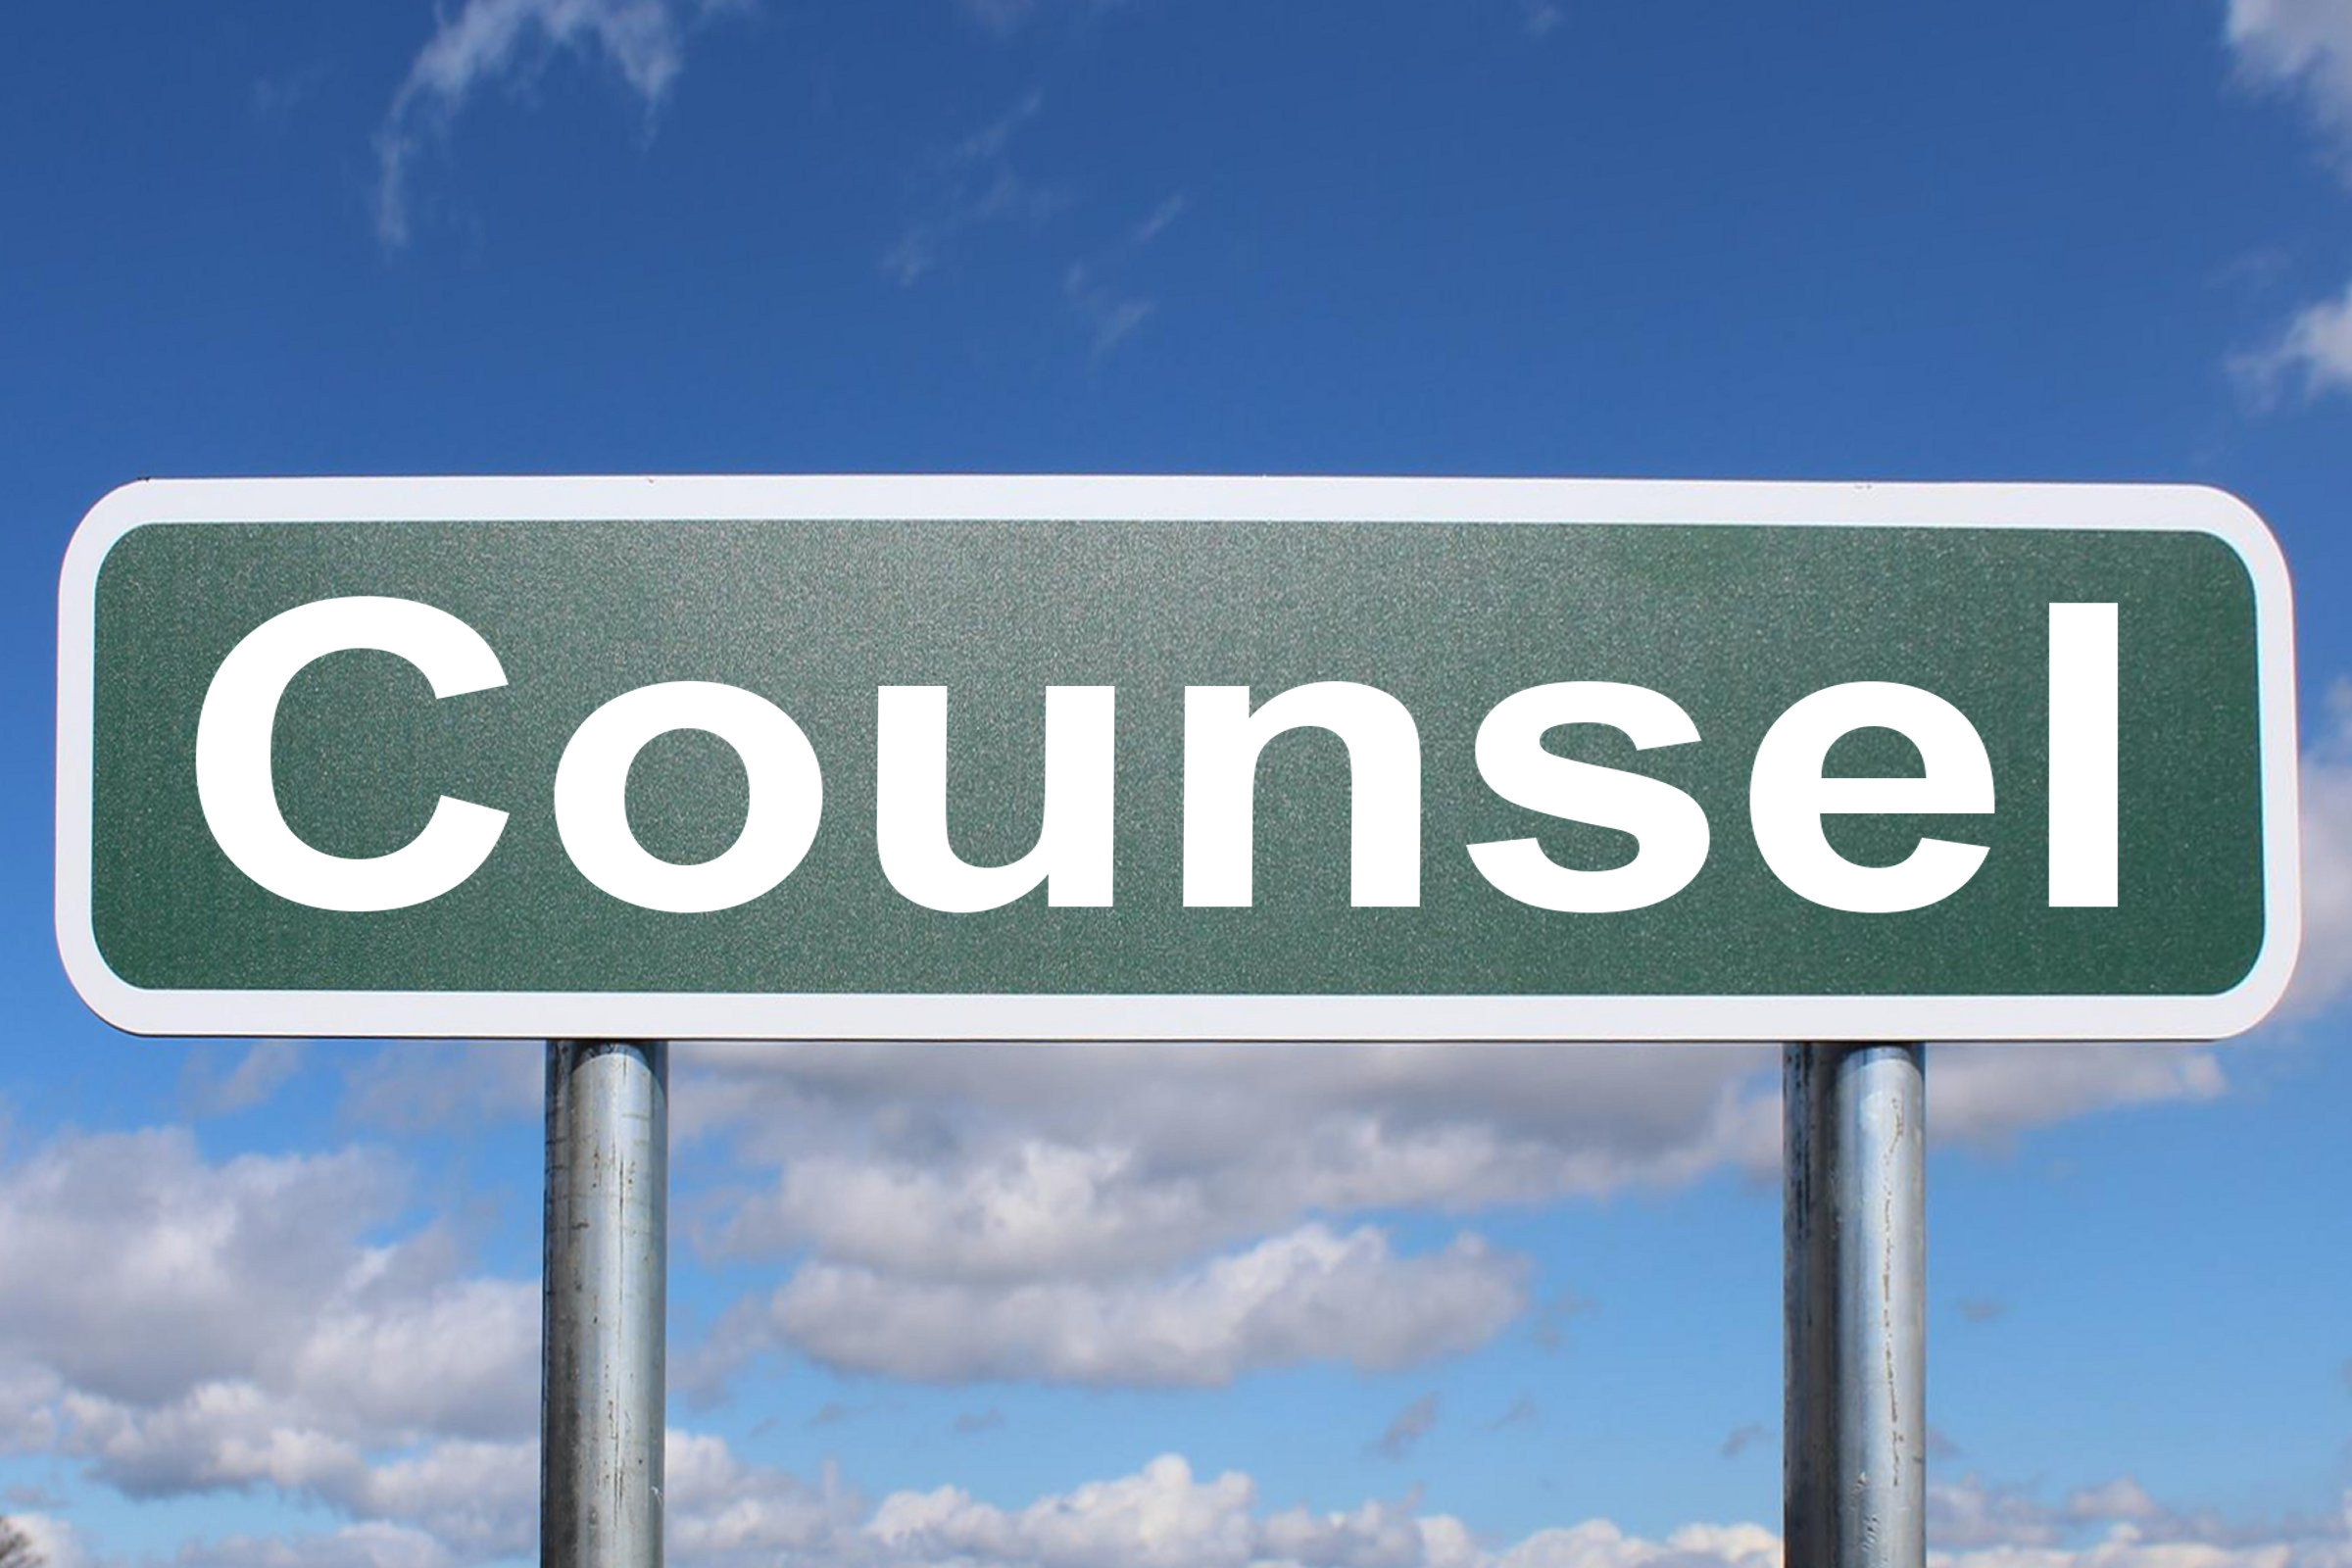 counsel